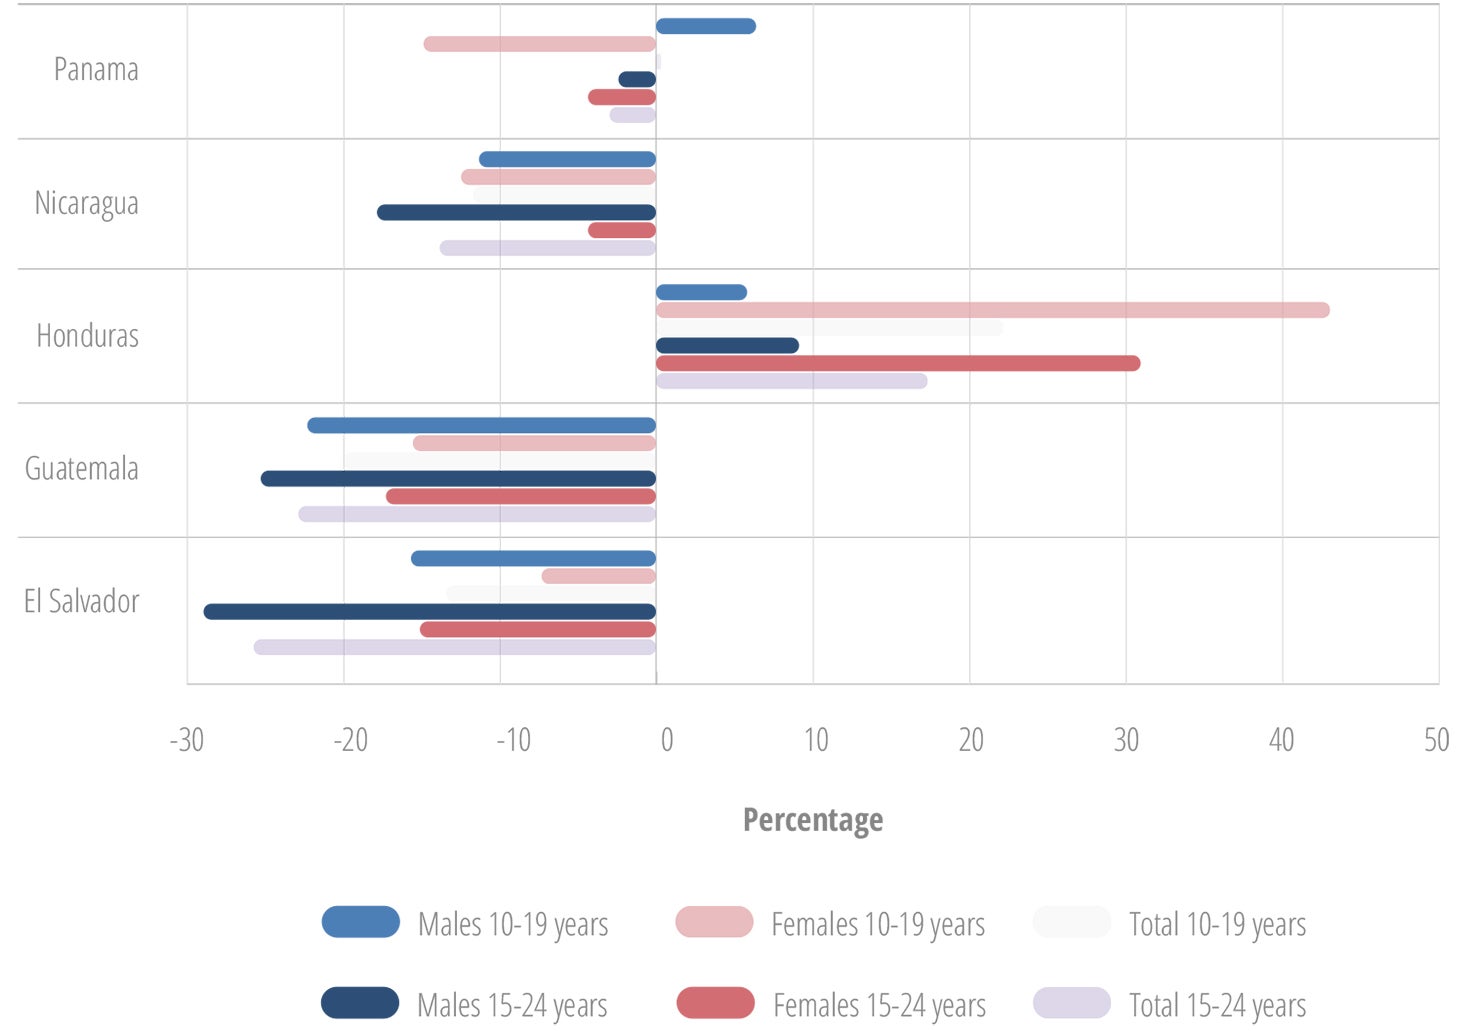 Percentage change in adolescent and youth mortality betwen 2008 and 2012 in selected Central American countries, by sex and age group